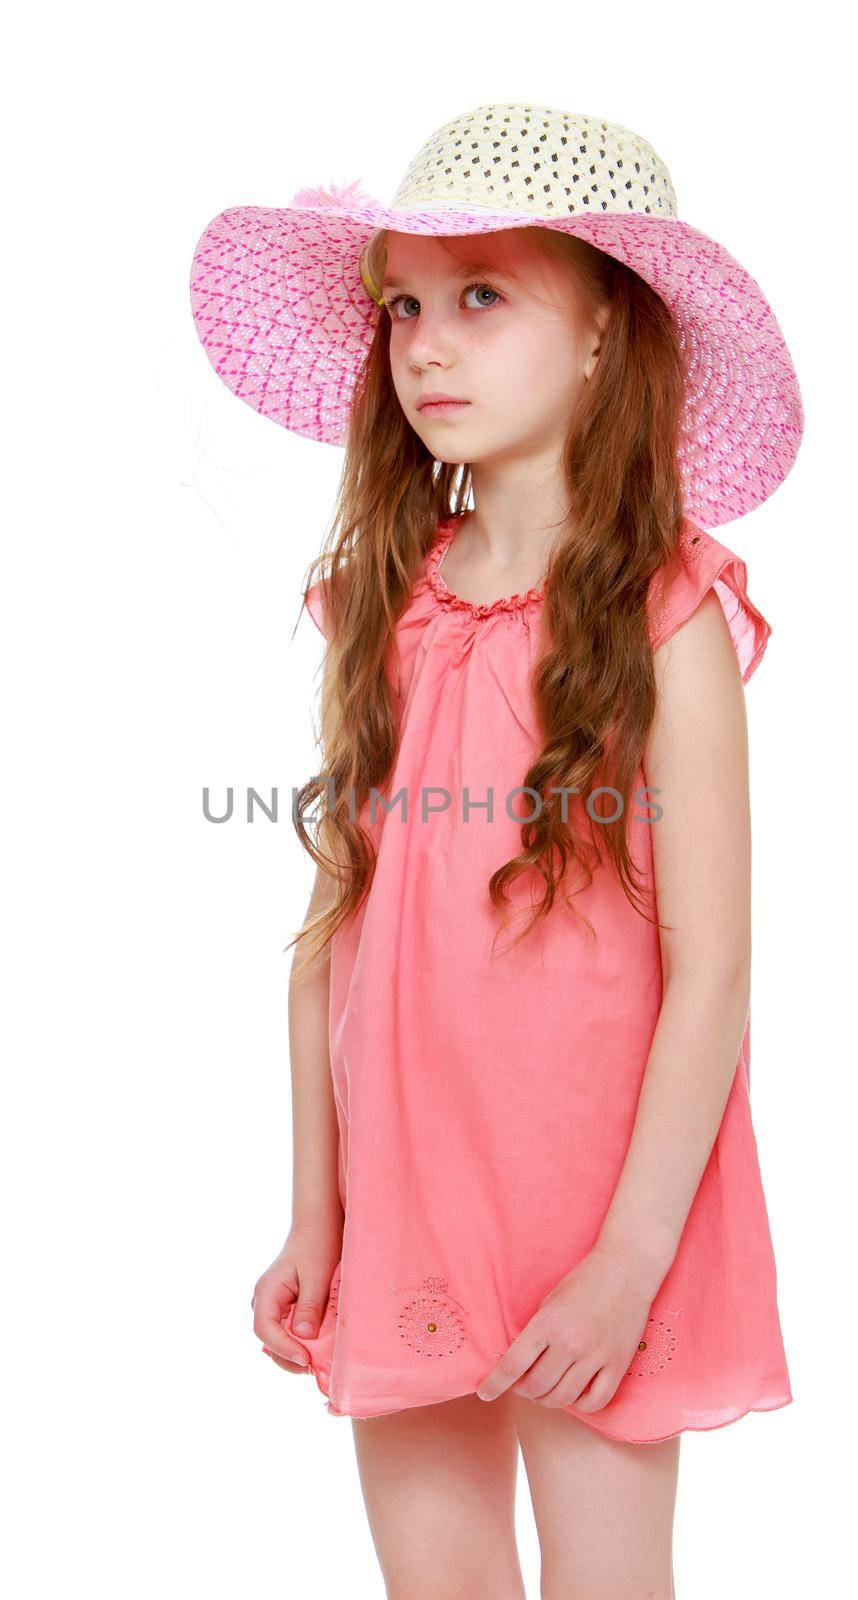 The doubting little girl with long pigtails to her waist and braided white bows. In short pink summer dress and pink hat. Standing sideways to the camera. Close-up - Isolated on white background